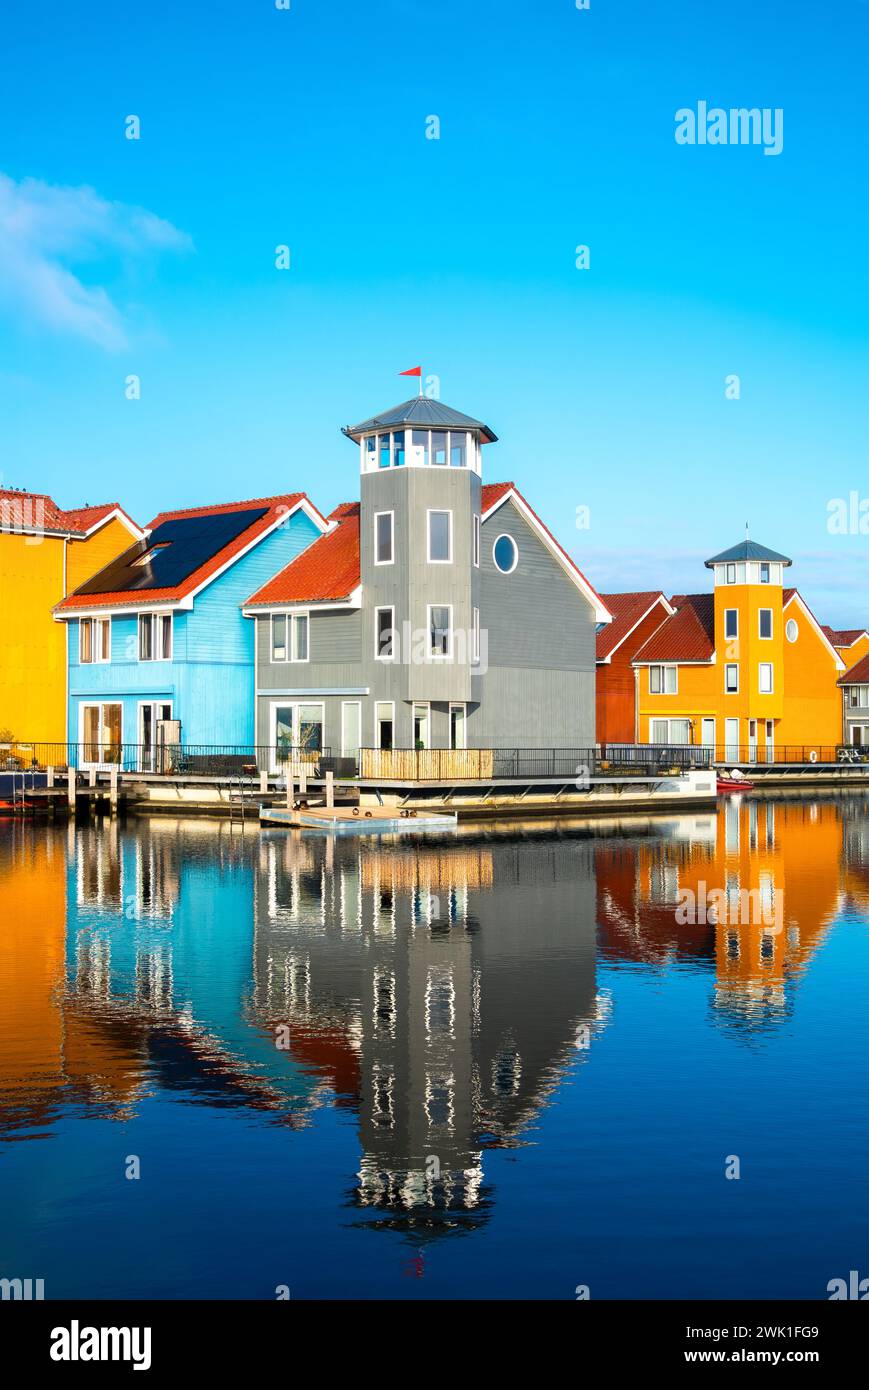 Groningen Reitdiephaven Reitdiep Marina harbor harbour. Colorful colourful waterfront Boardwalk and Pier Houses in Scandinavian style. Stock Photo